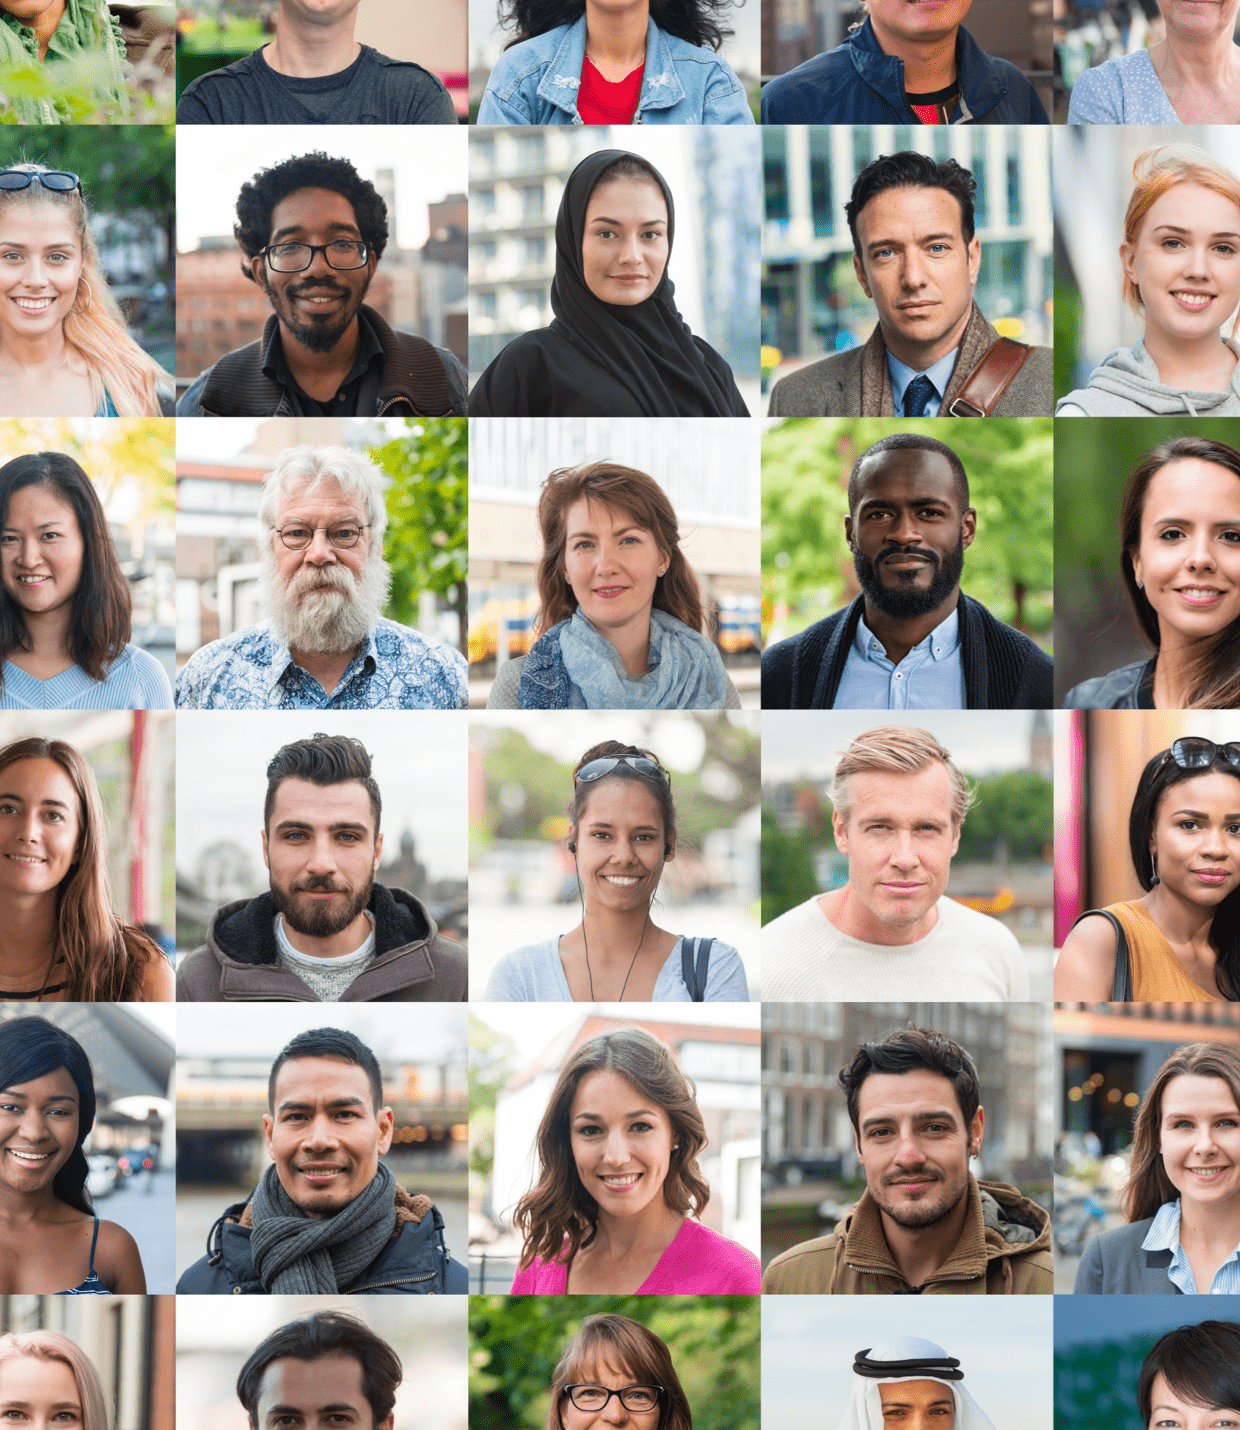 Images of many diverse people, smiling and looking directly at the camera.